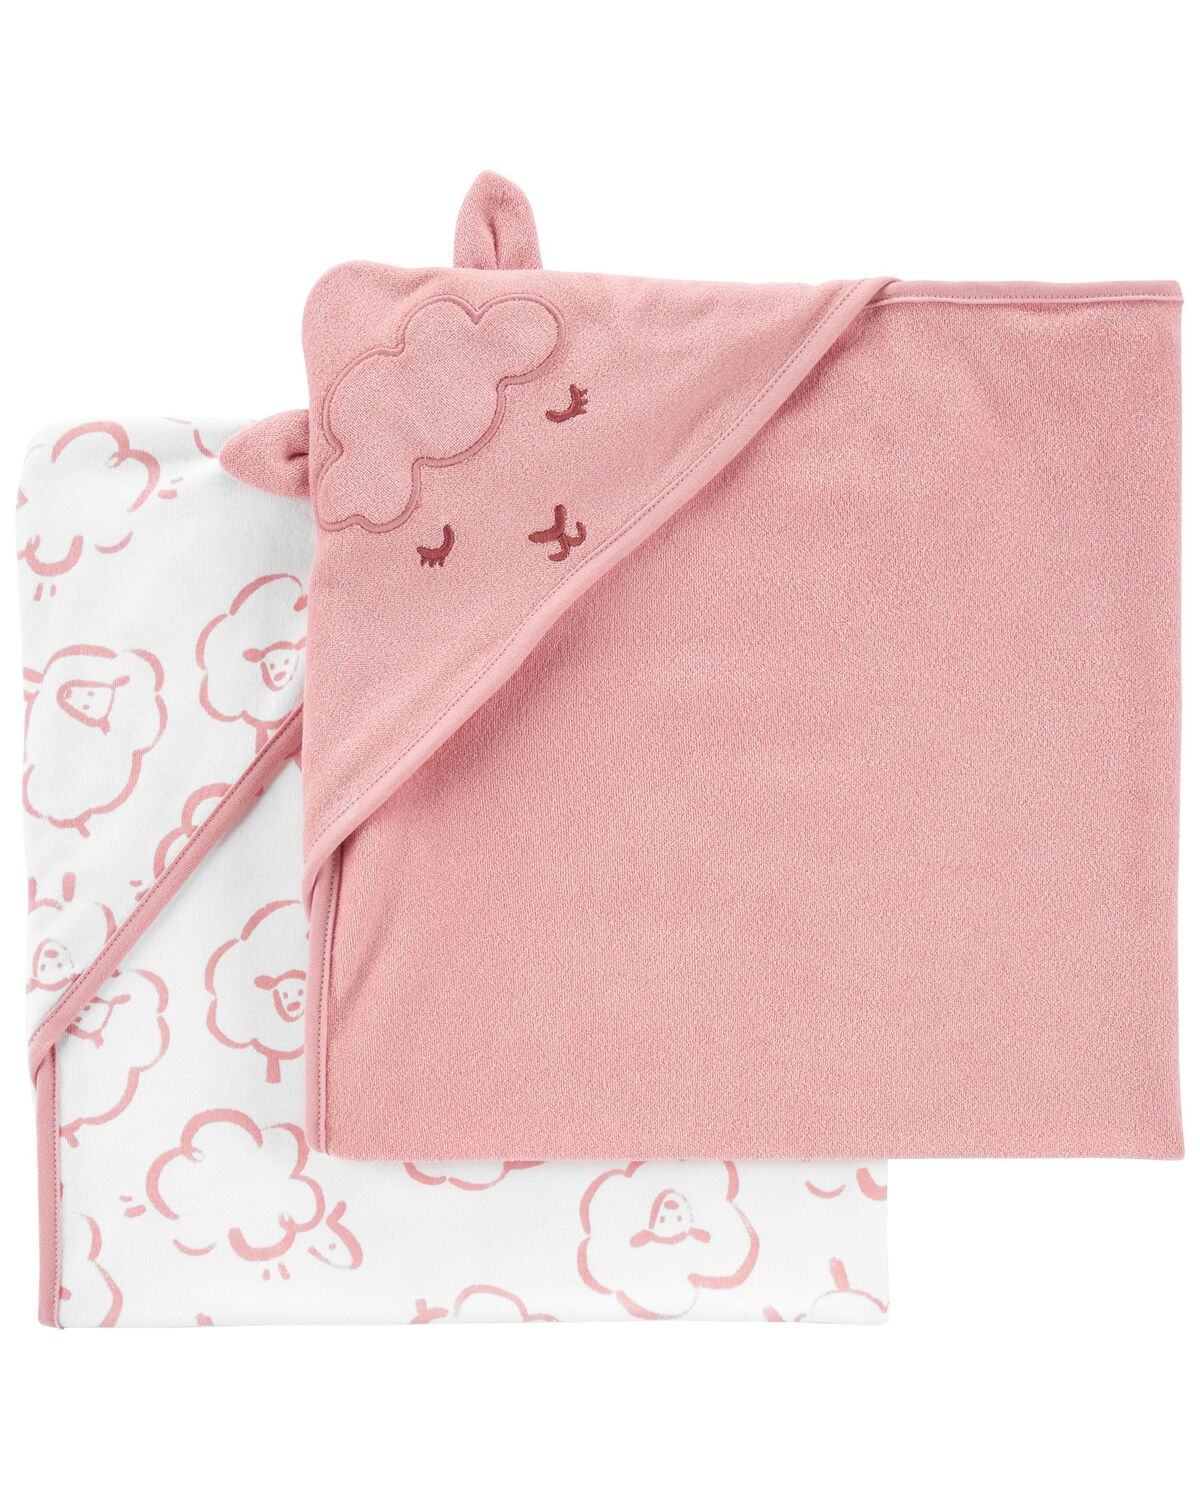 Carters Pink/White Baby 2-Pack Hooded Towels